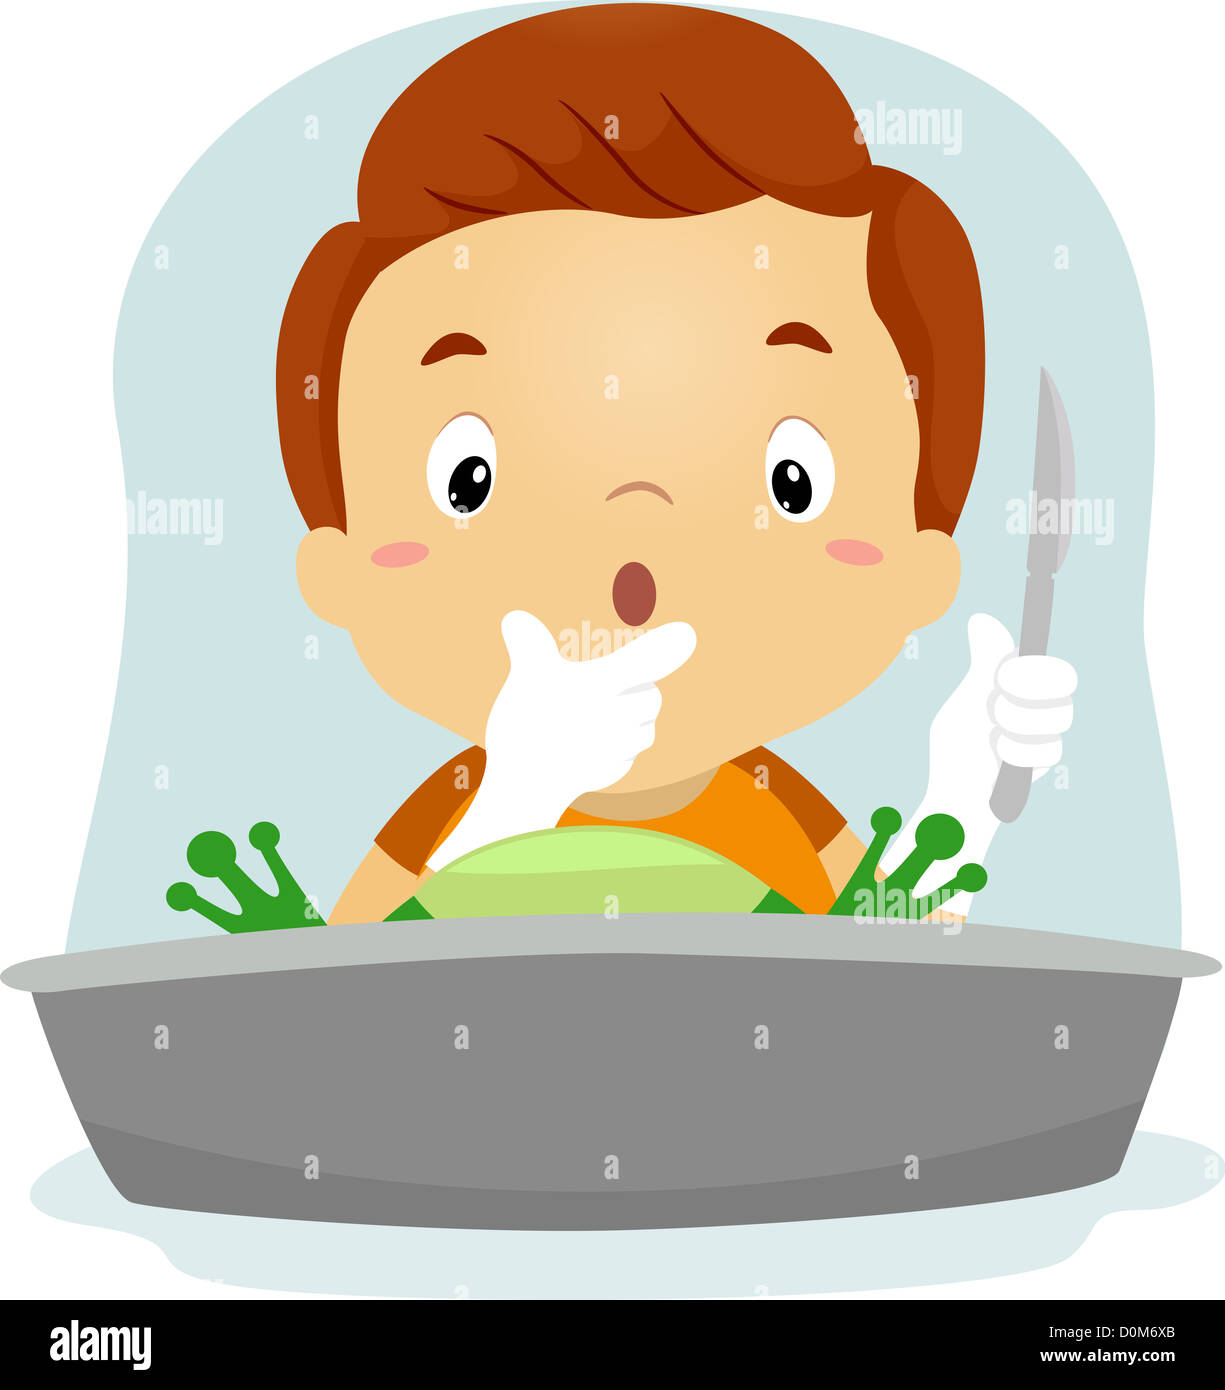 Illustration of a Boy Dissecting a Frog Stock Photo